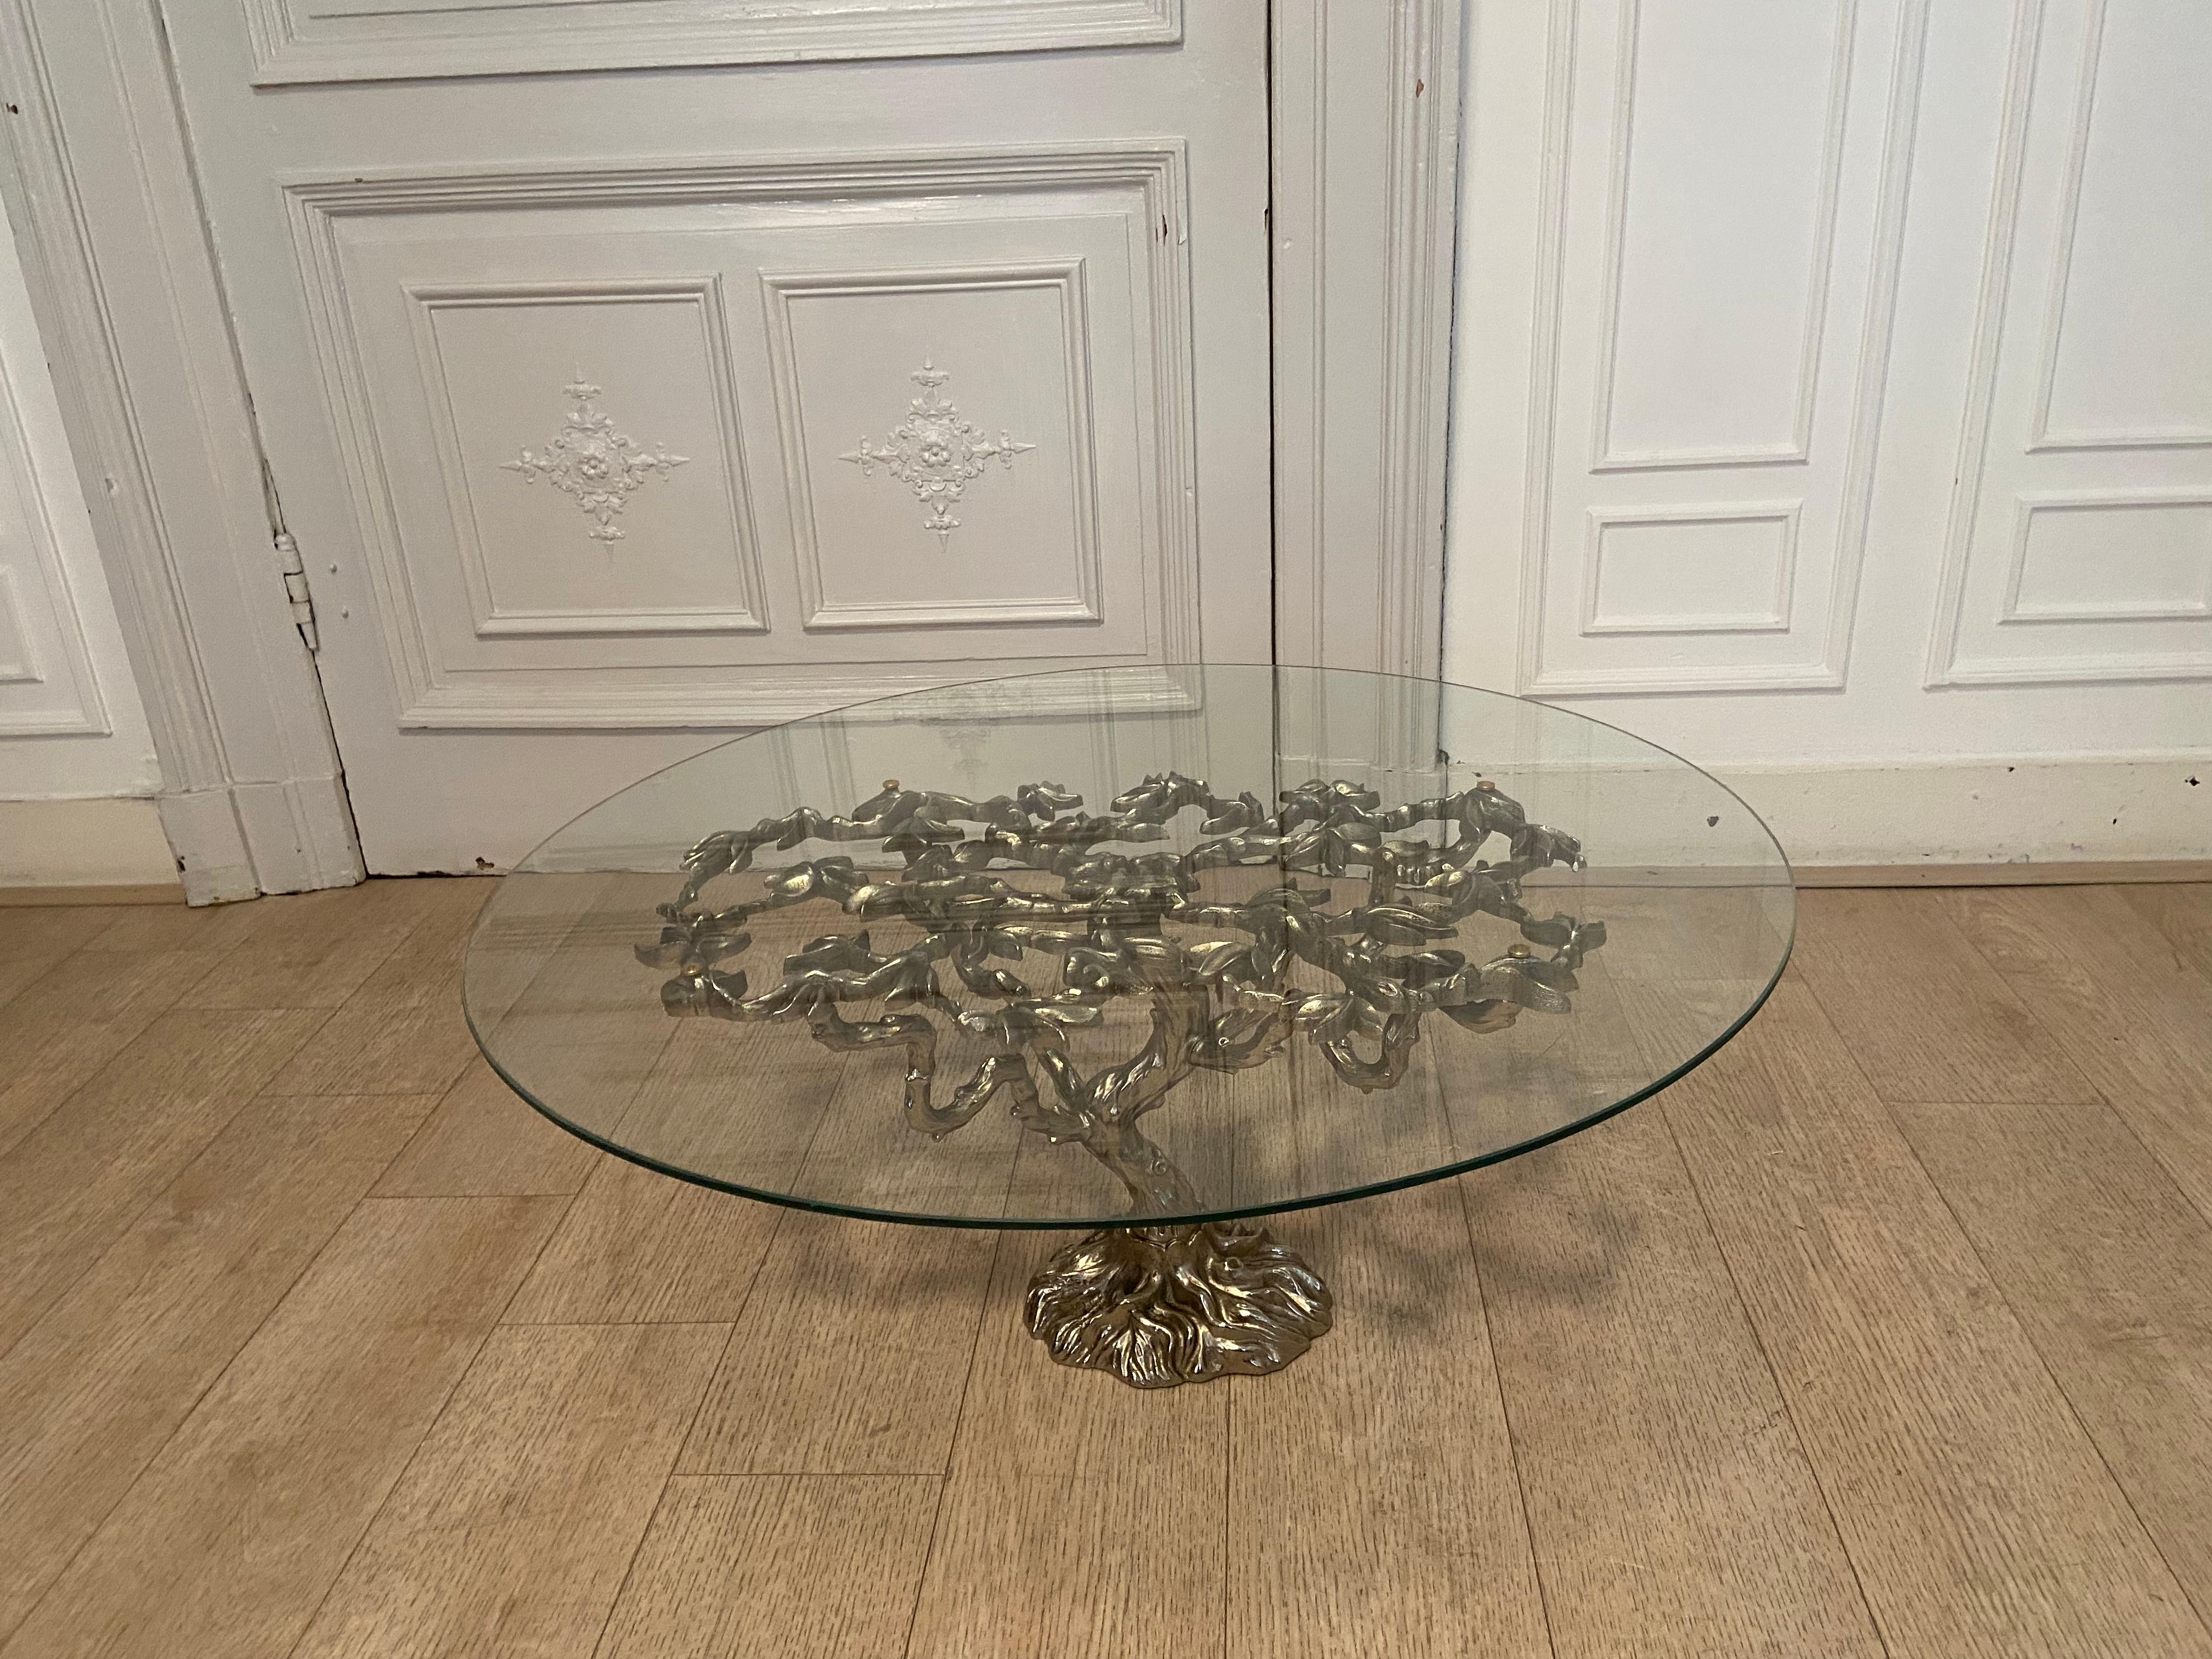 Mid Century Coffee Table in Silver Color from the 1970s Design with Vegetable 3